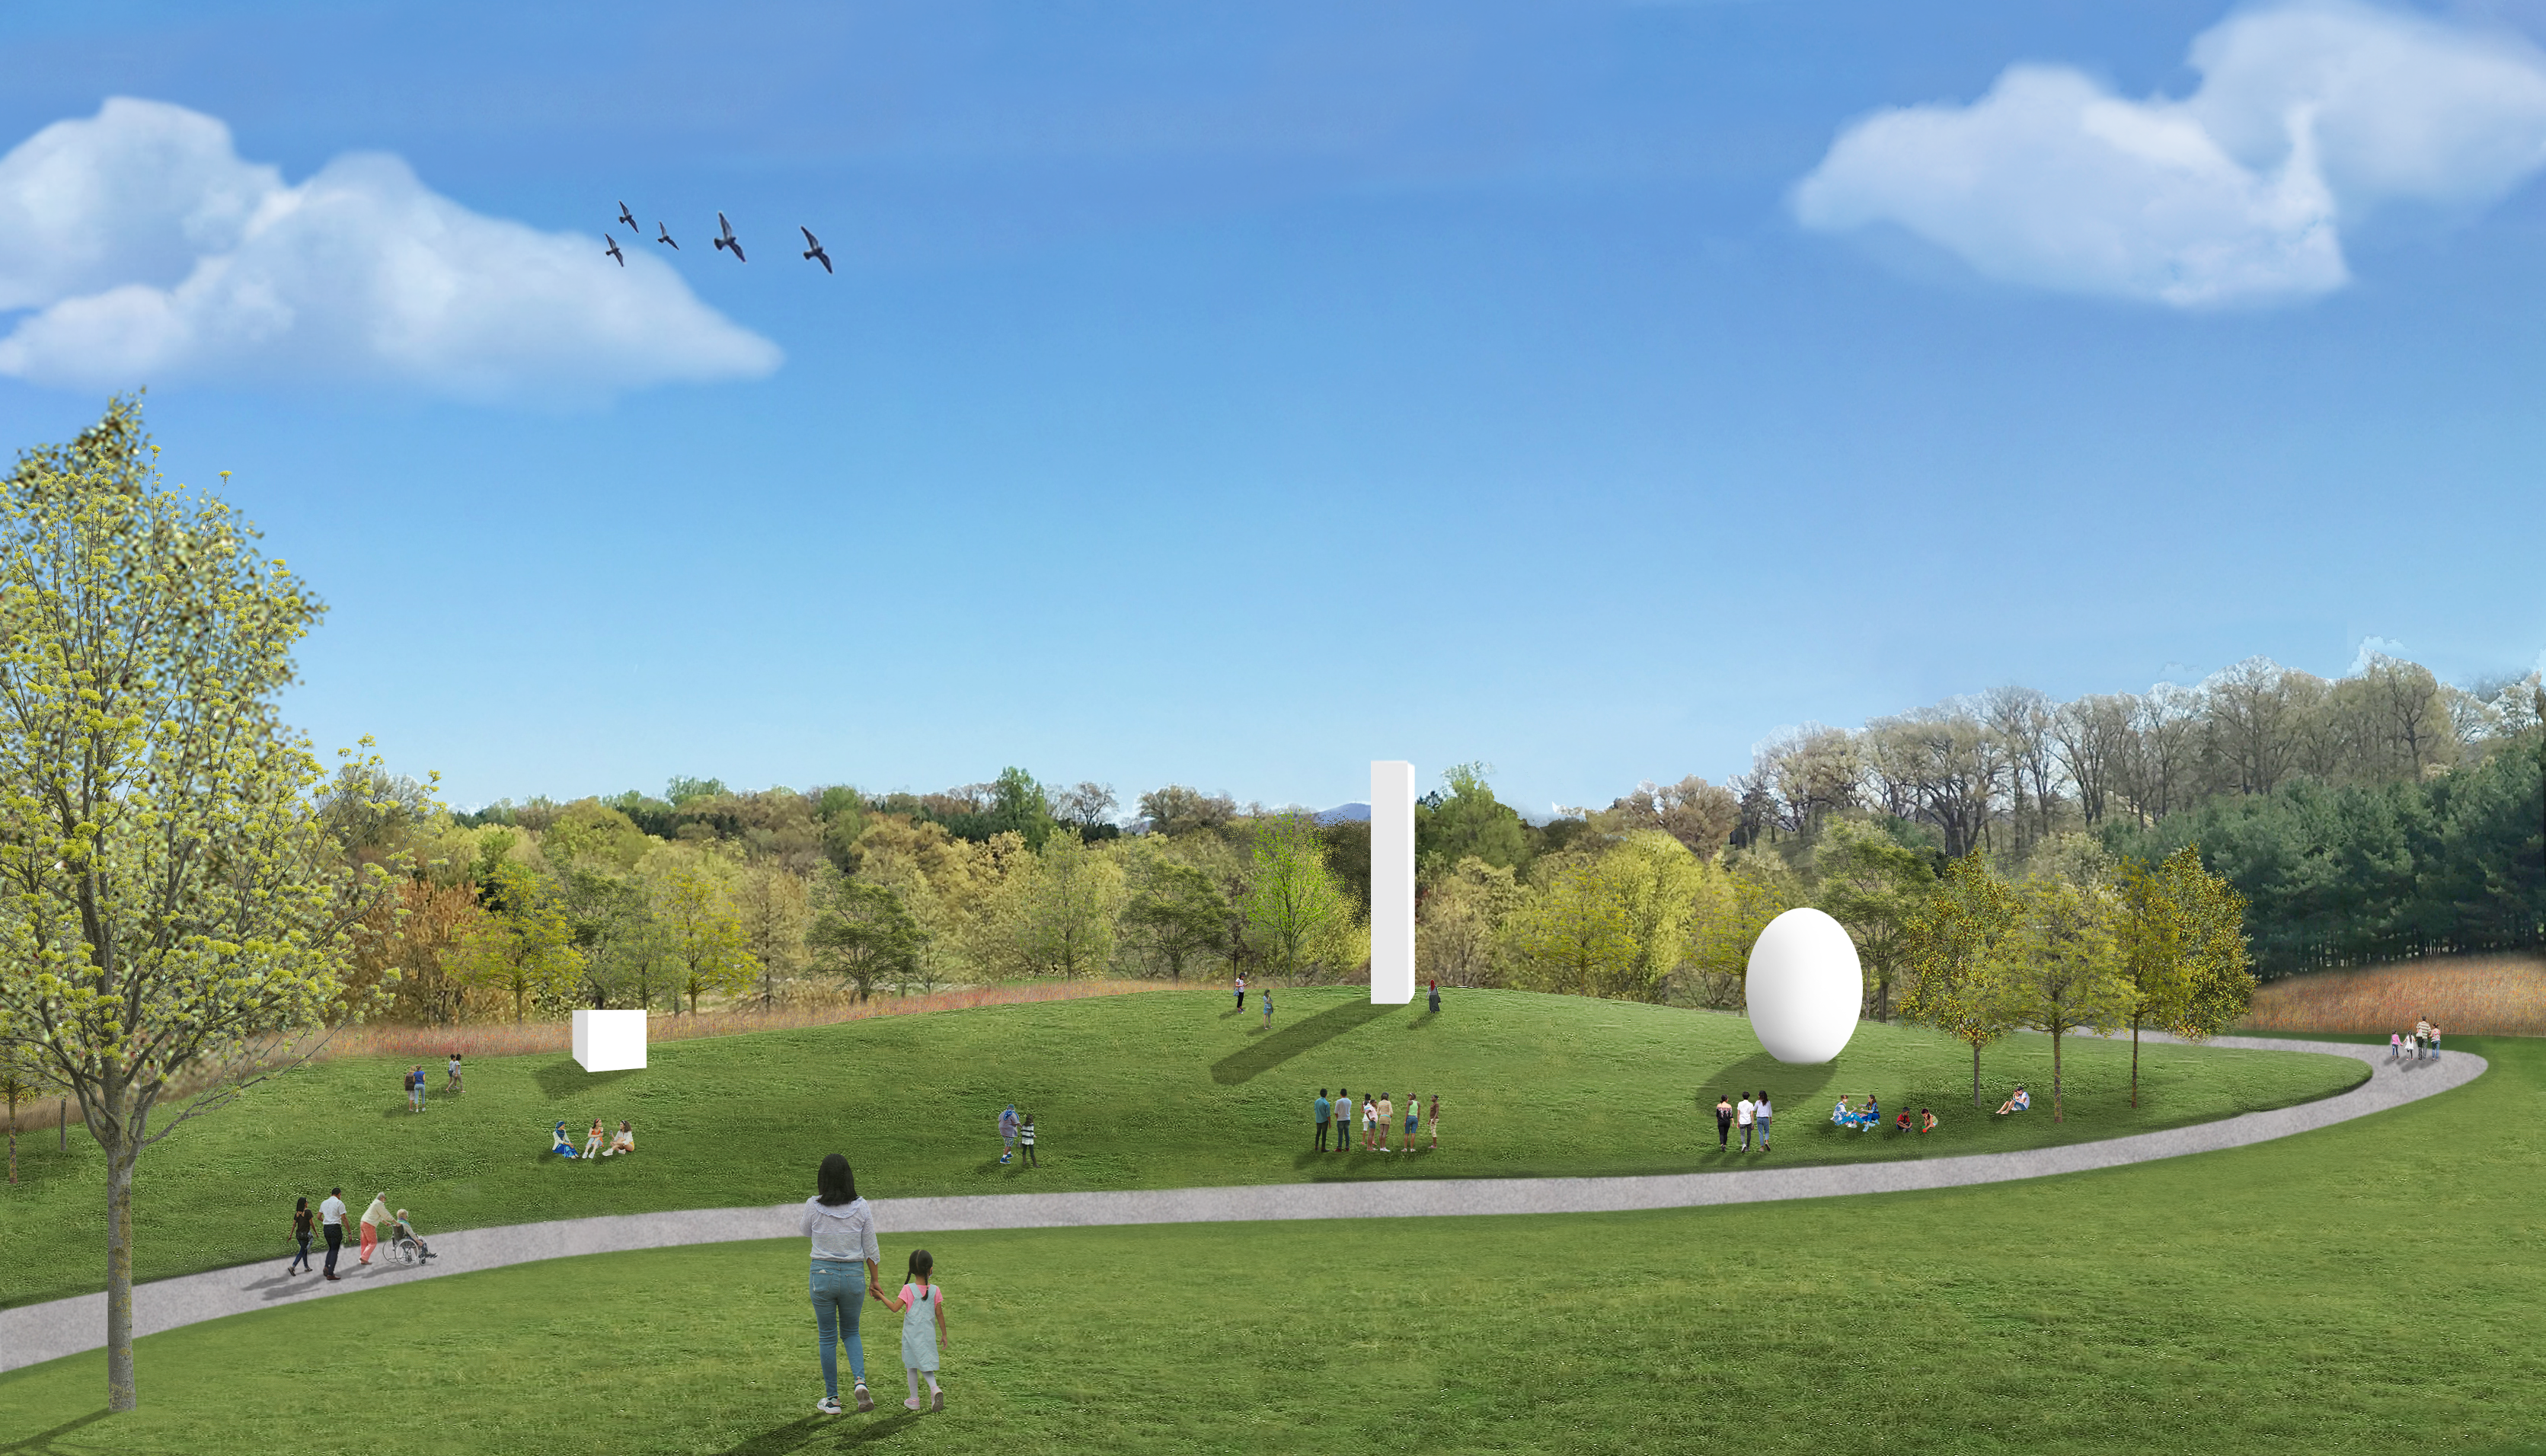 Storm King Art Center getting even more expansive with $45M
revamp